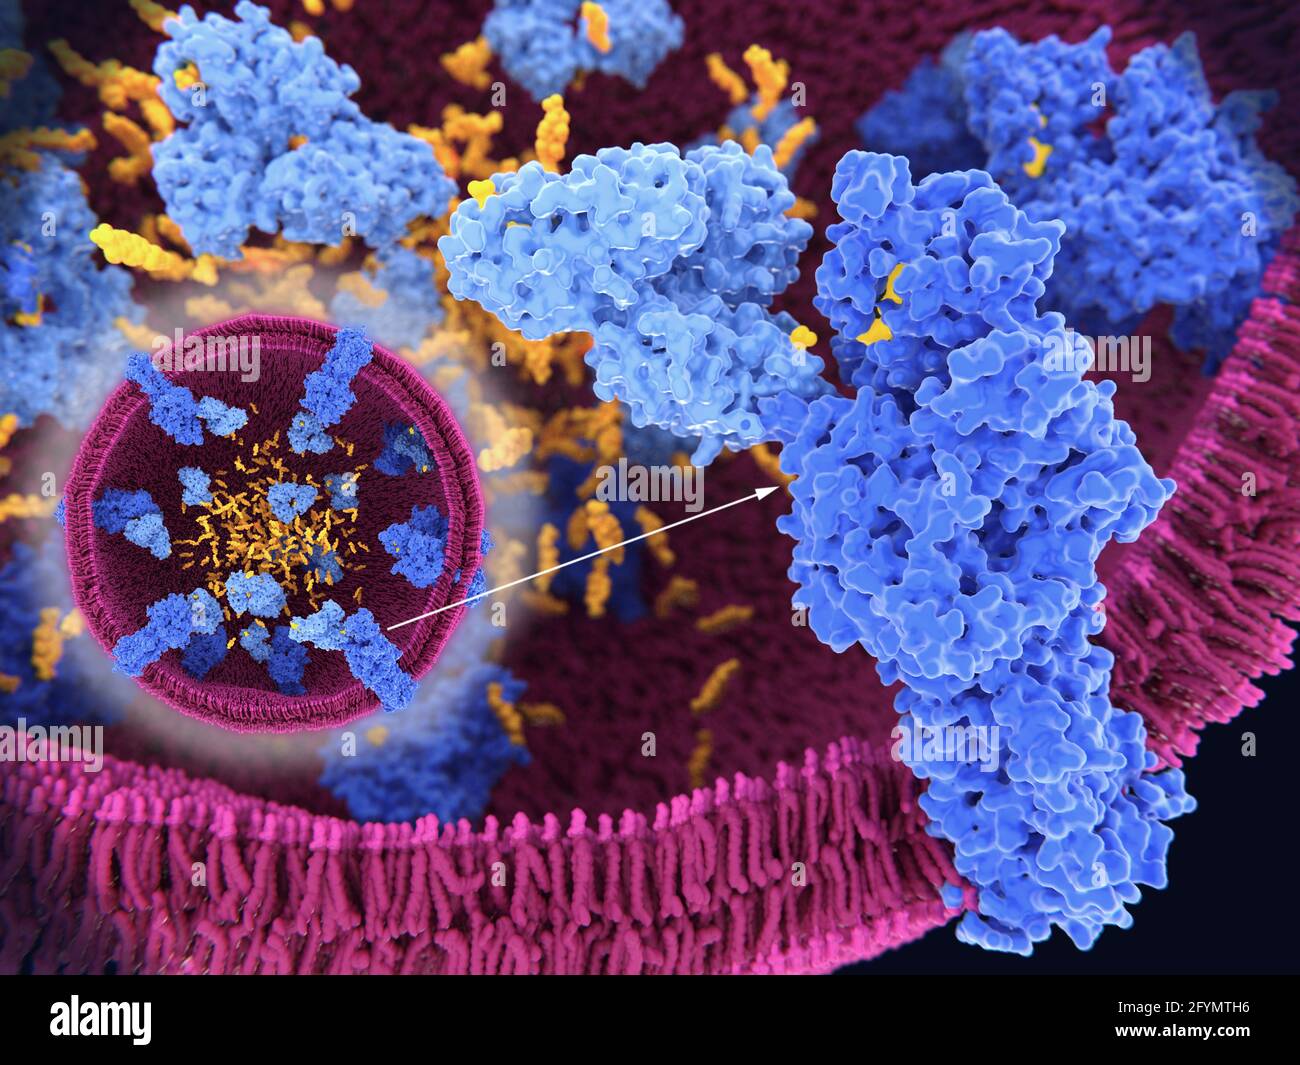 Cholesterol processing in lysosome, illustration Stock Photo